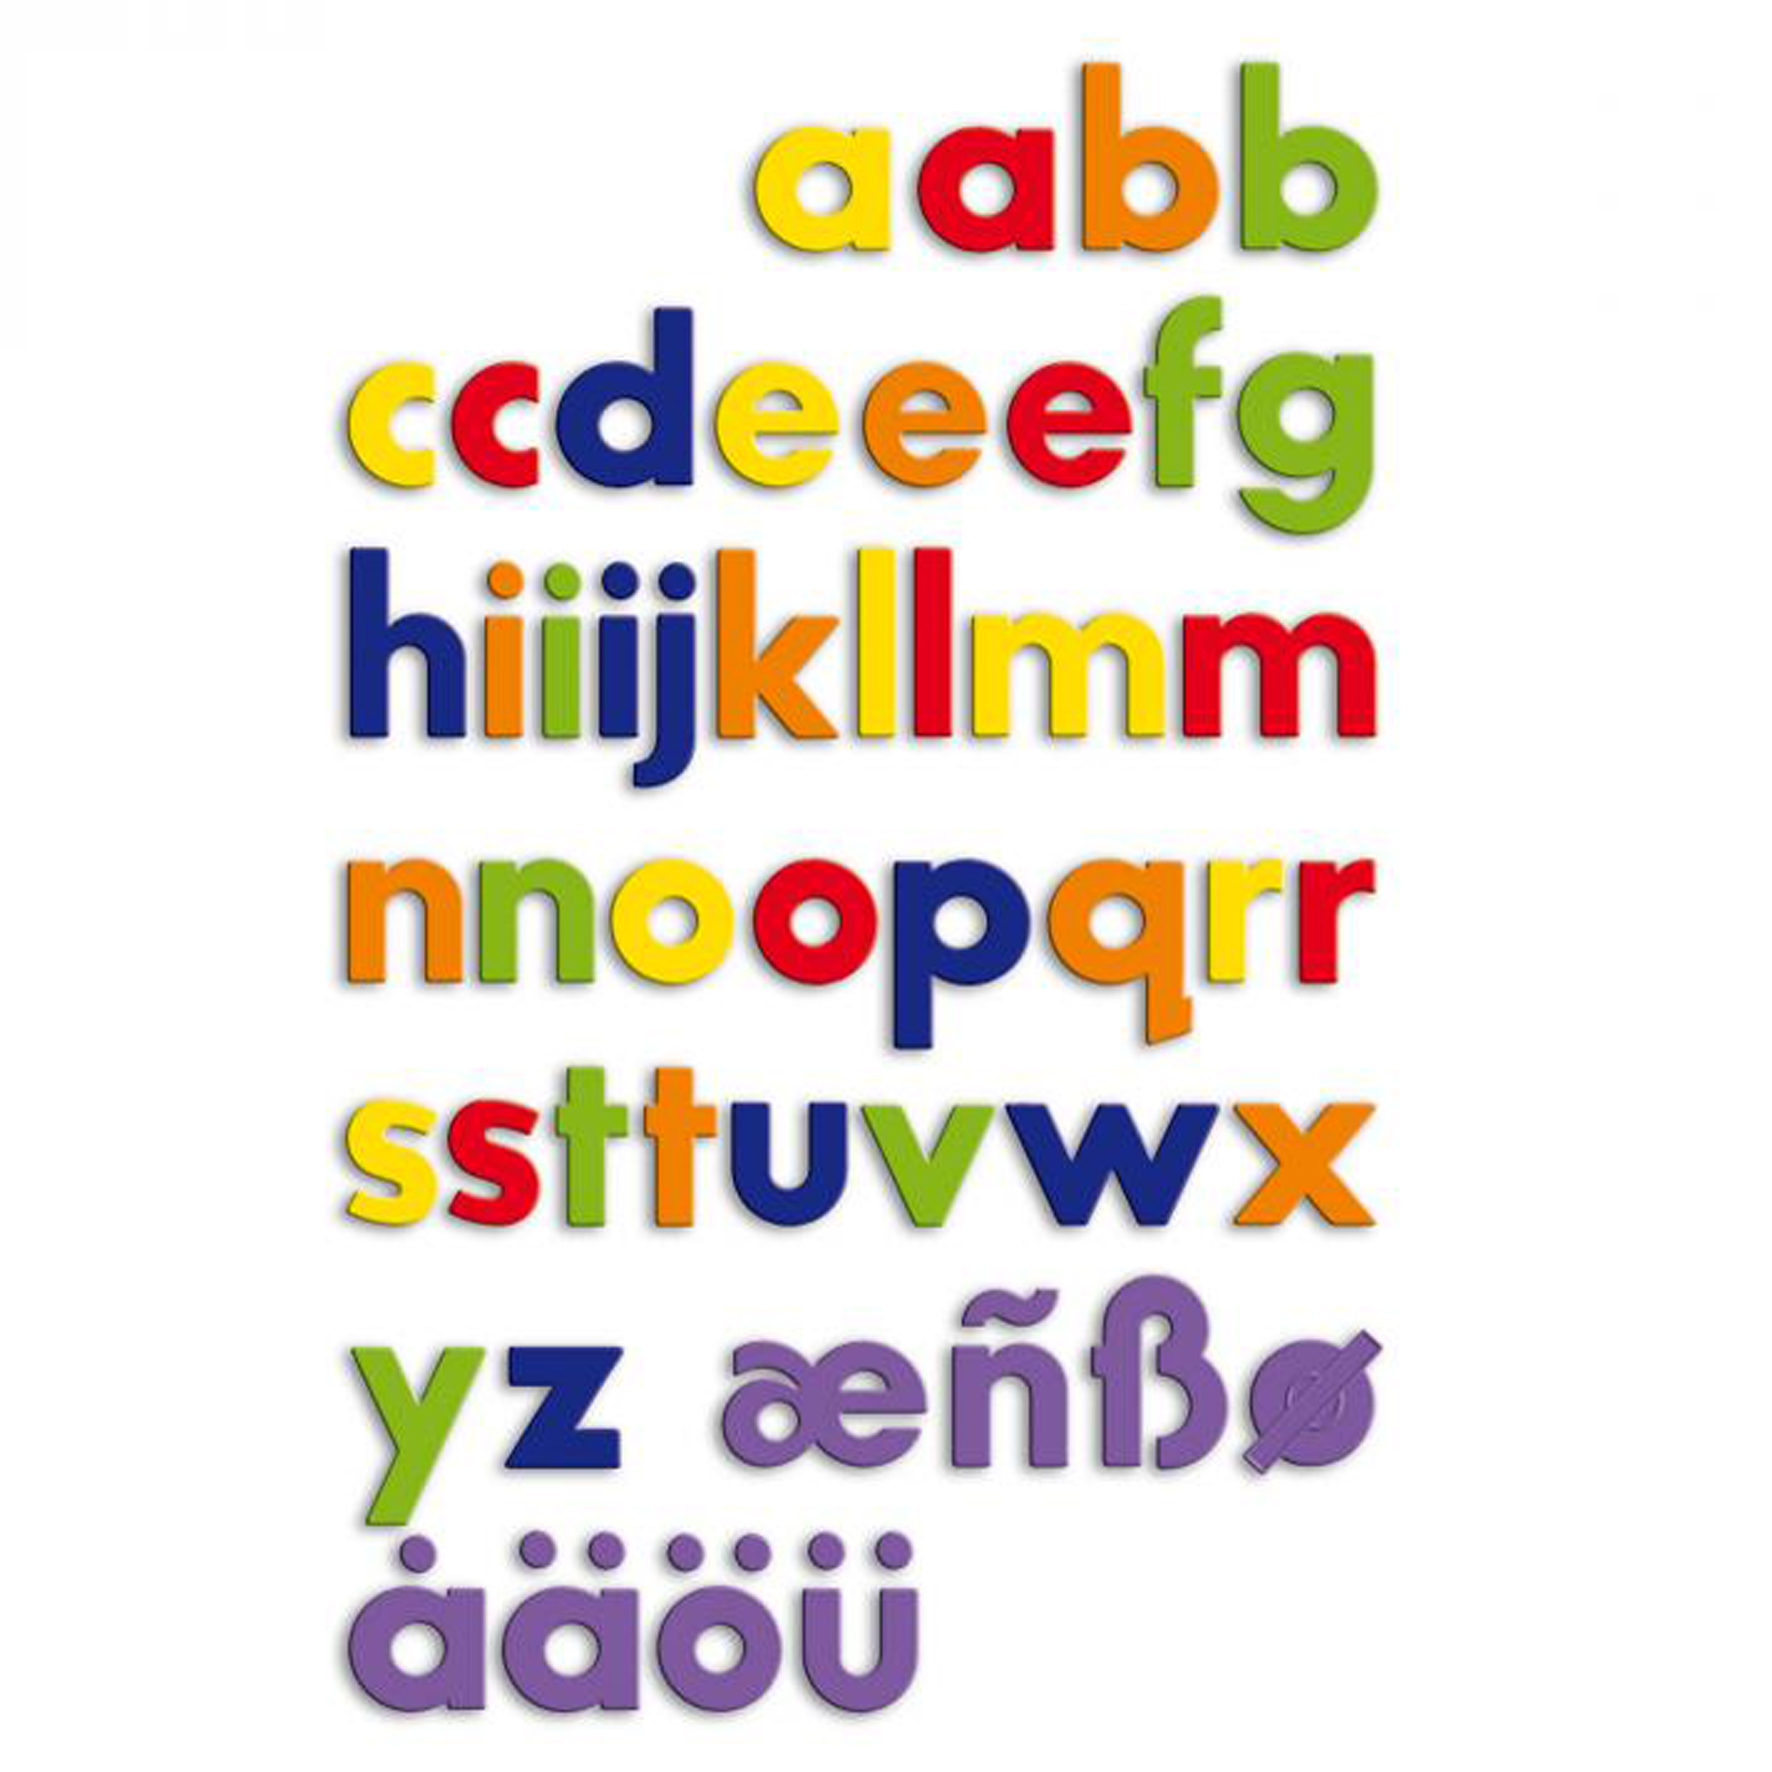 Letters & numbers quercetti magnetic letters